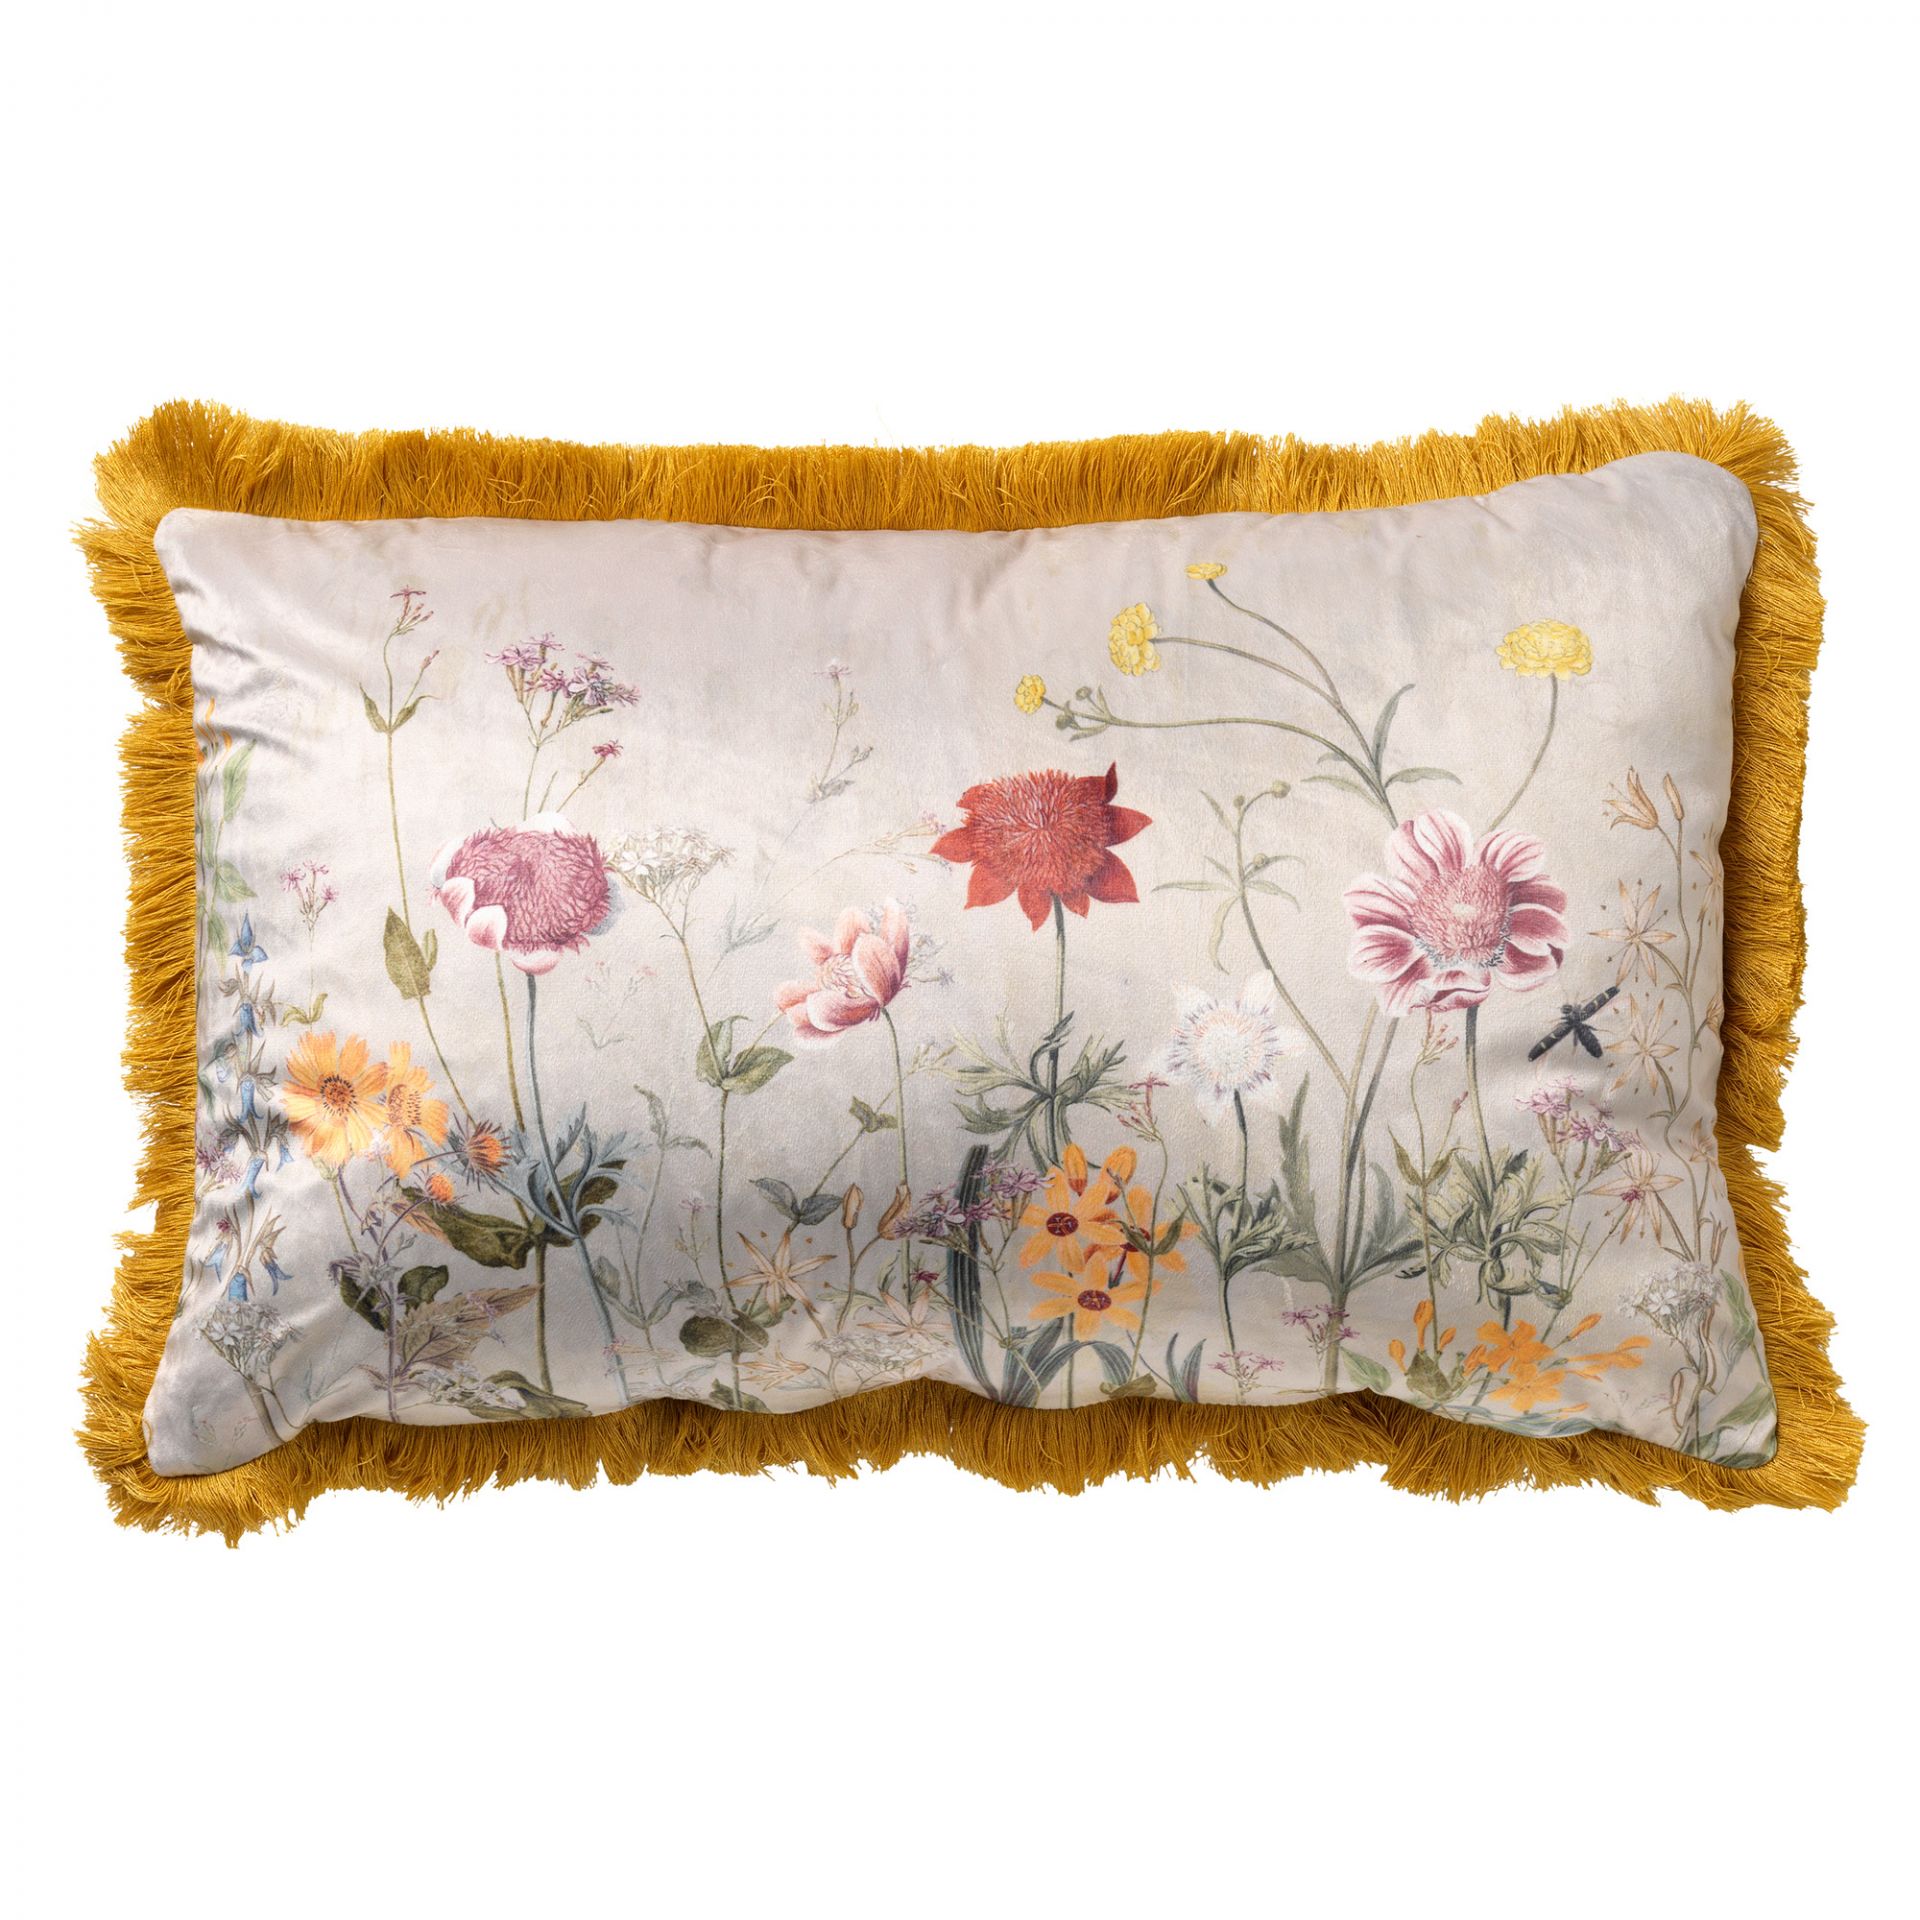 POSSY - Cushion with flower pattern 40x60 cm Golden Glow - yellow